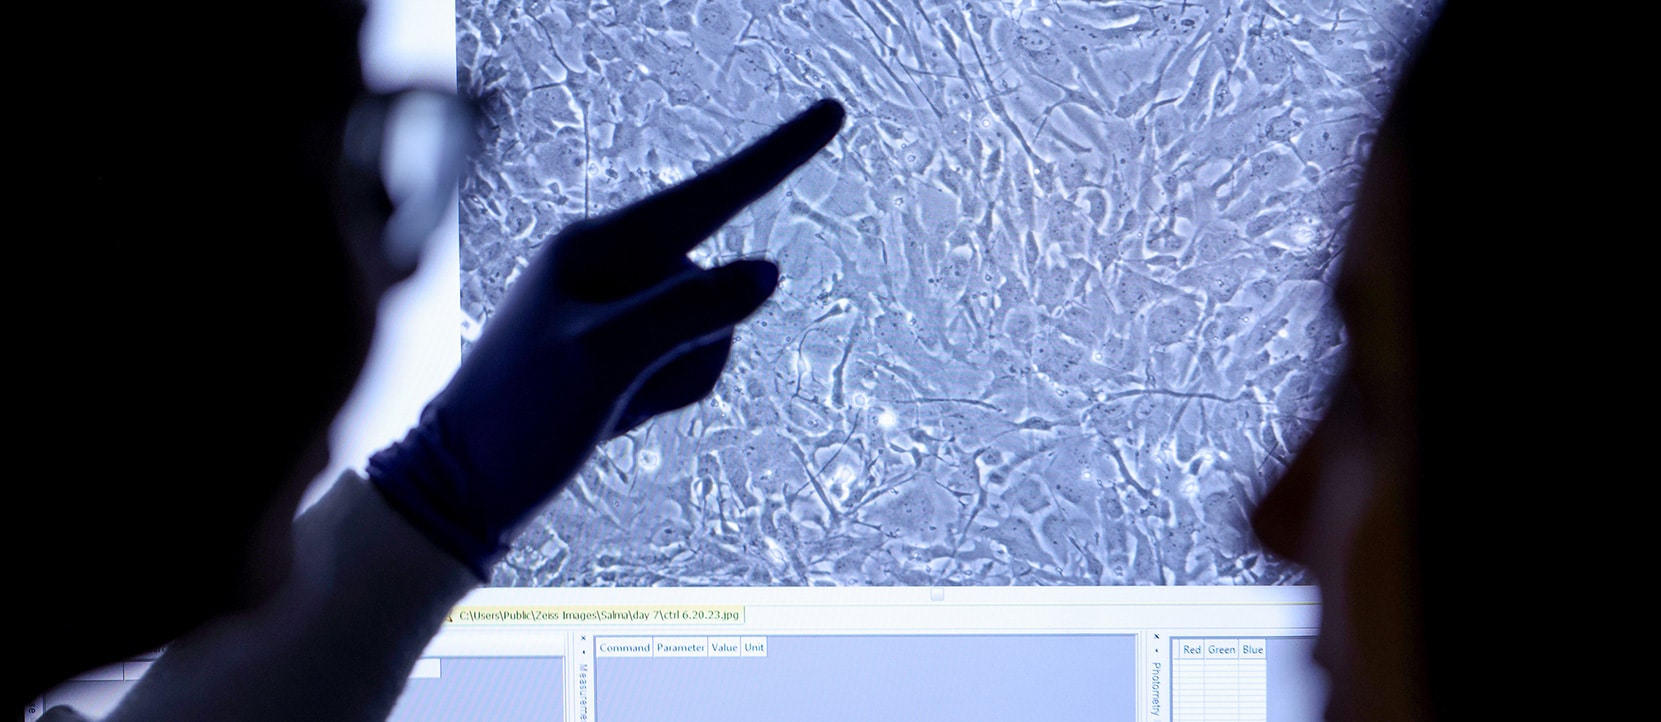 A scientist points at a microscope image